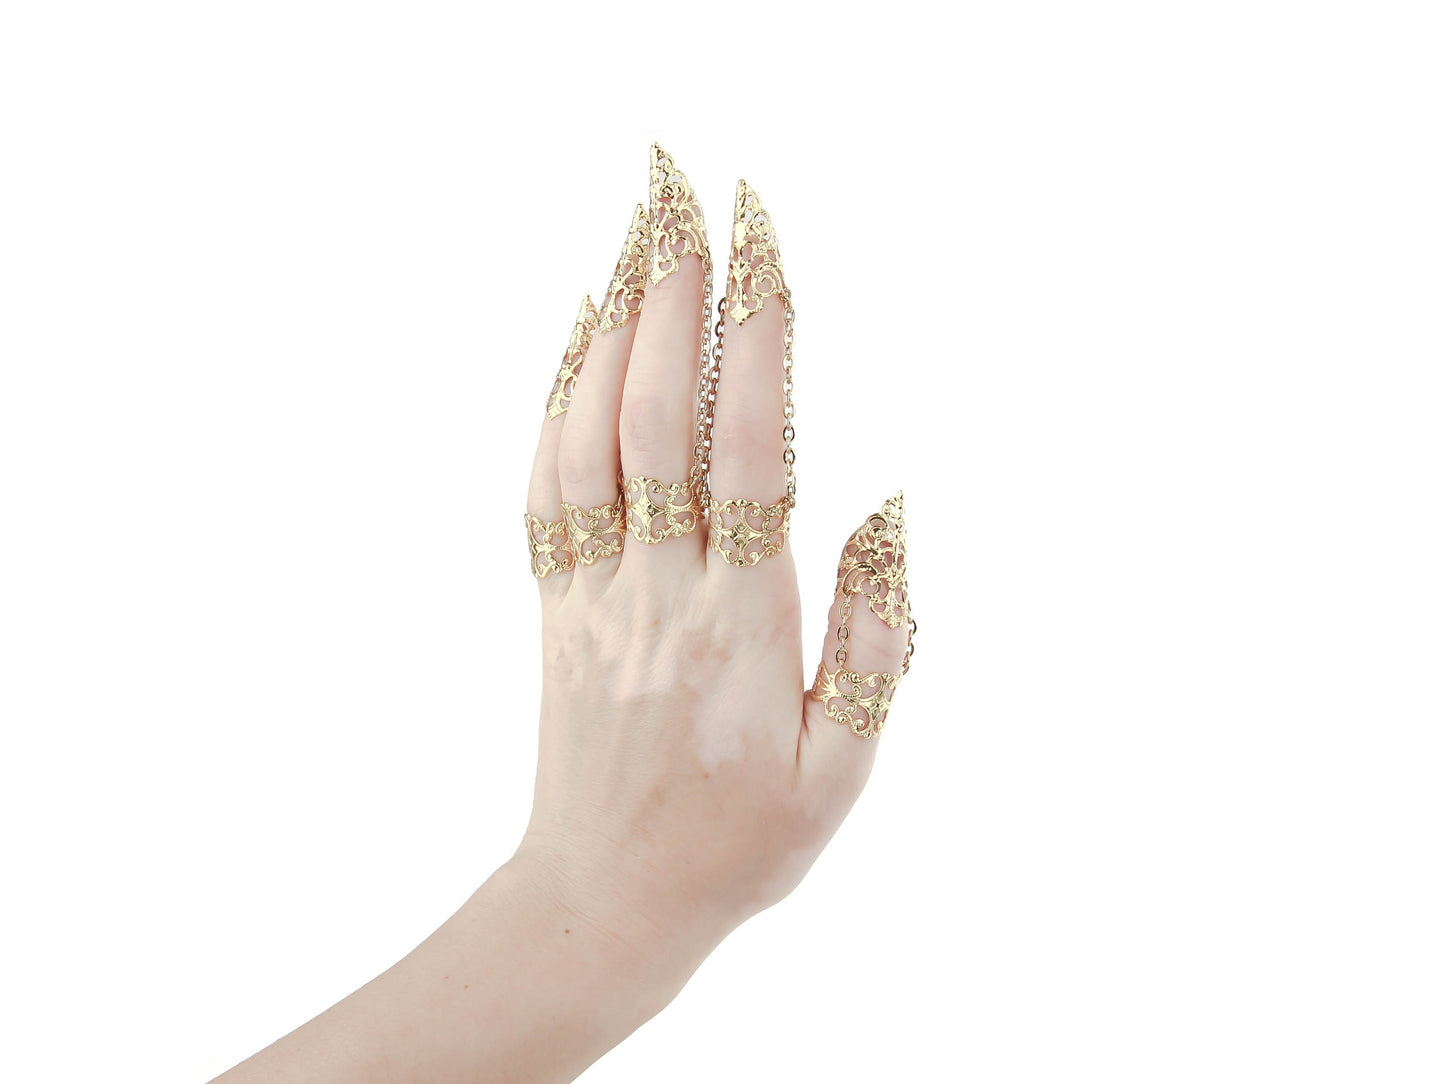 A hand elegantly displays Myril Jewels' full set of gold claw rings, each piece featuring ornate filigree designs that evoke Neo Gothic sophistication. Ideal for those with a love for Gothic-chic and dark-avantgarde aesthetics, this set complements Halloween outfits and adds an edge to everyday wear. It's a stunning choice for minimal goth enthusiasts or as standout rave party jewelry, capturing the Witchcore spirit and festival jewel trends